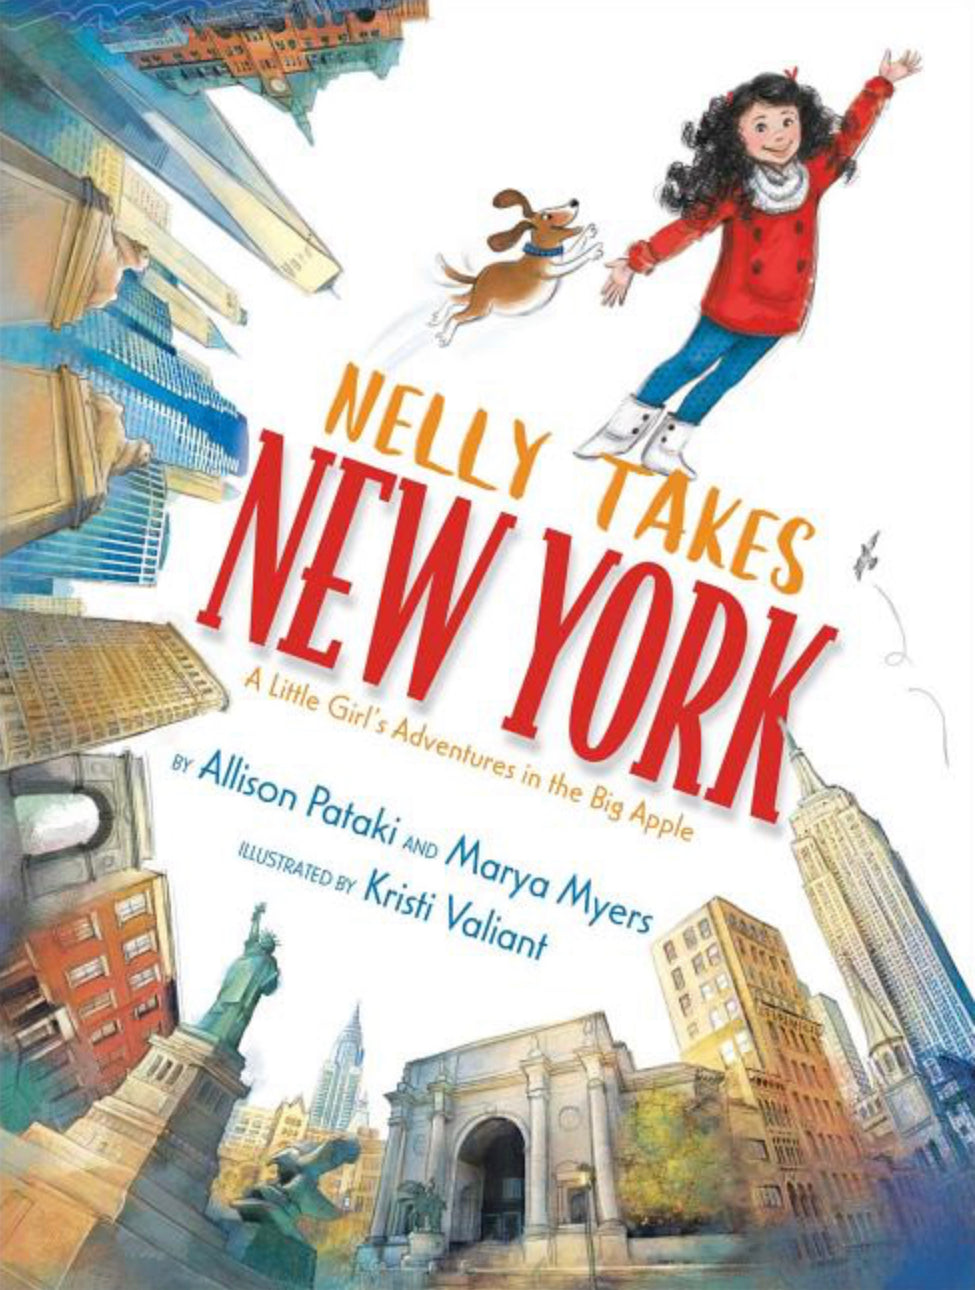 Nelly Takes New York: A Little Girl's Adventures in the Big Apple (Big City Adventures), Allison Pataki